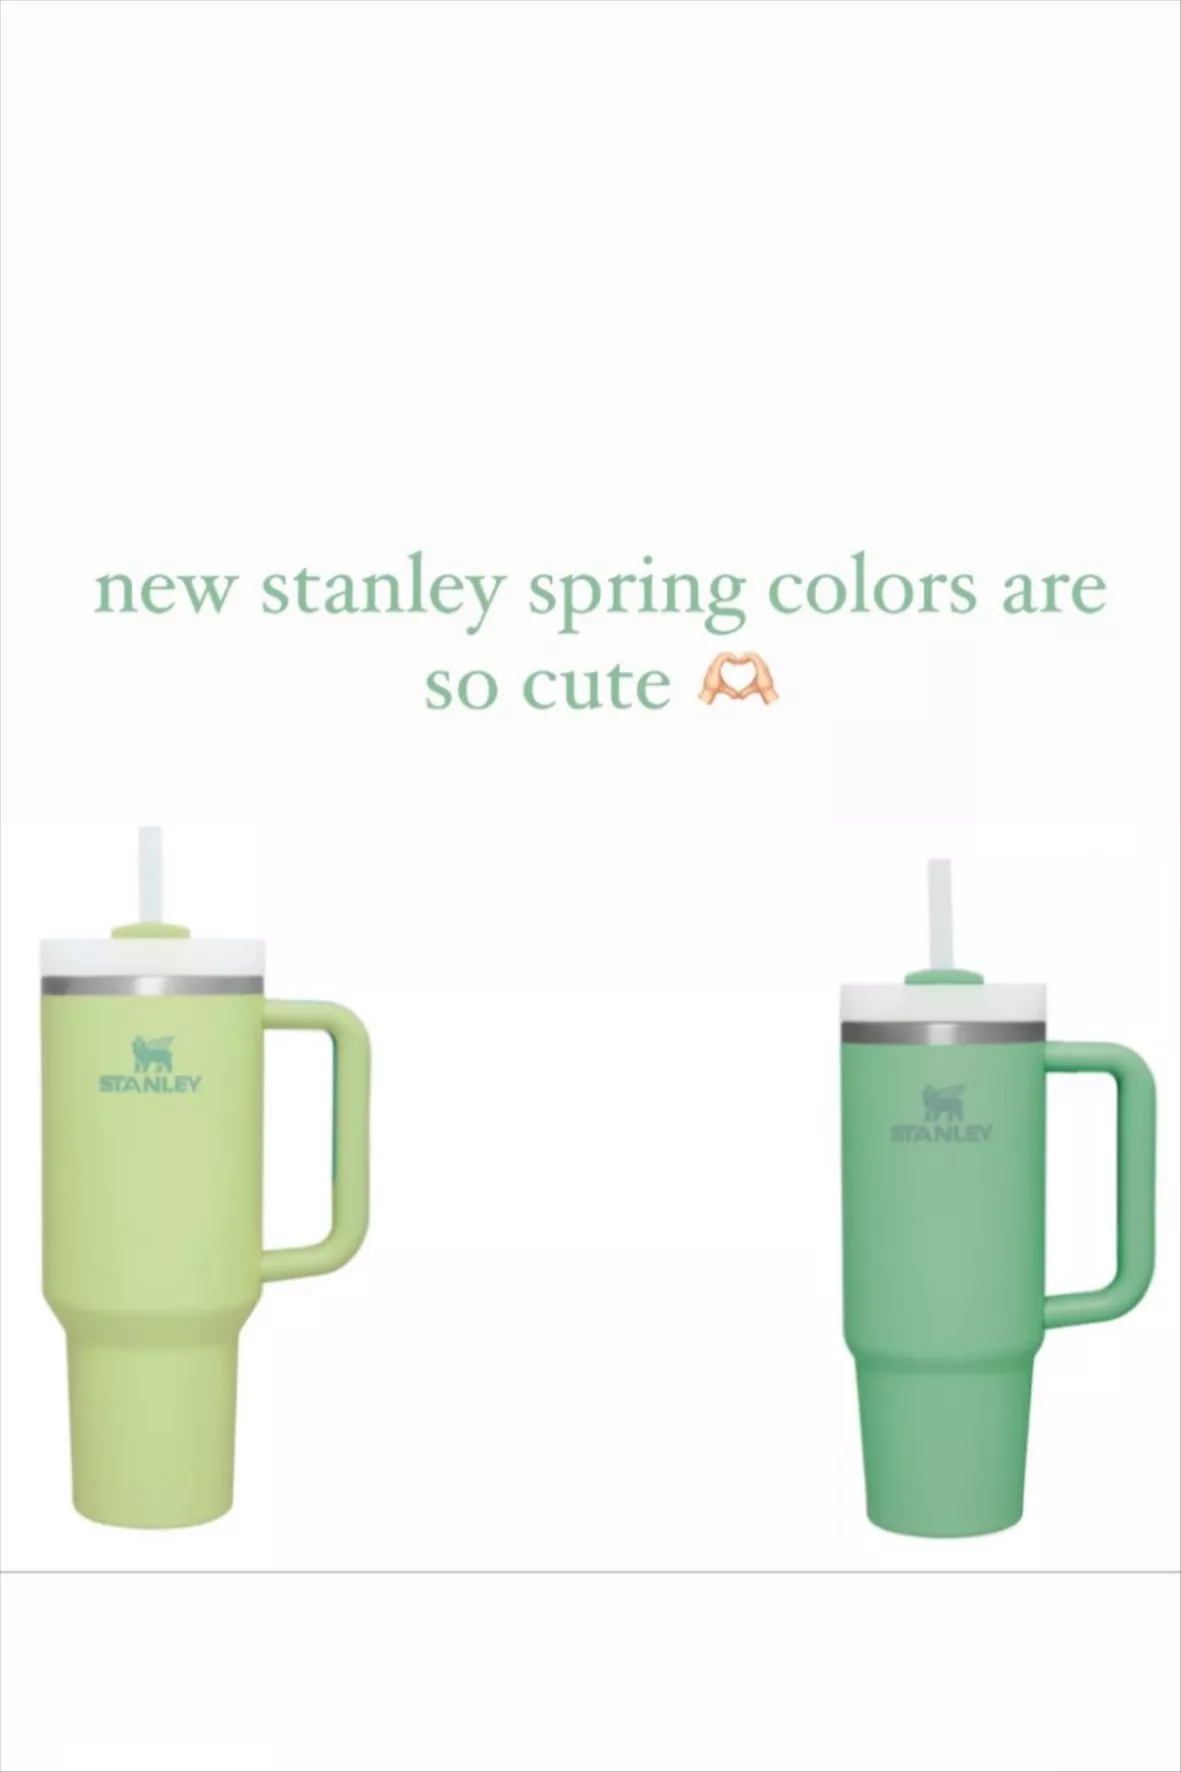 The Stanley Quencher Is Back in Stock and in 8 New Spring Colors